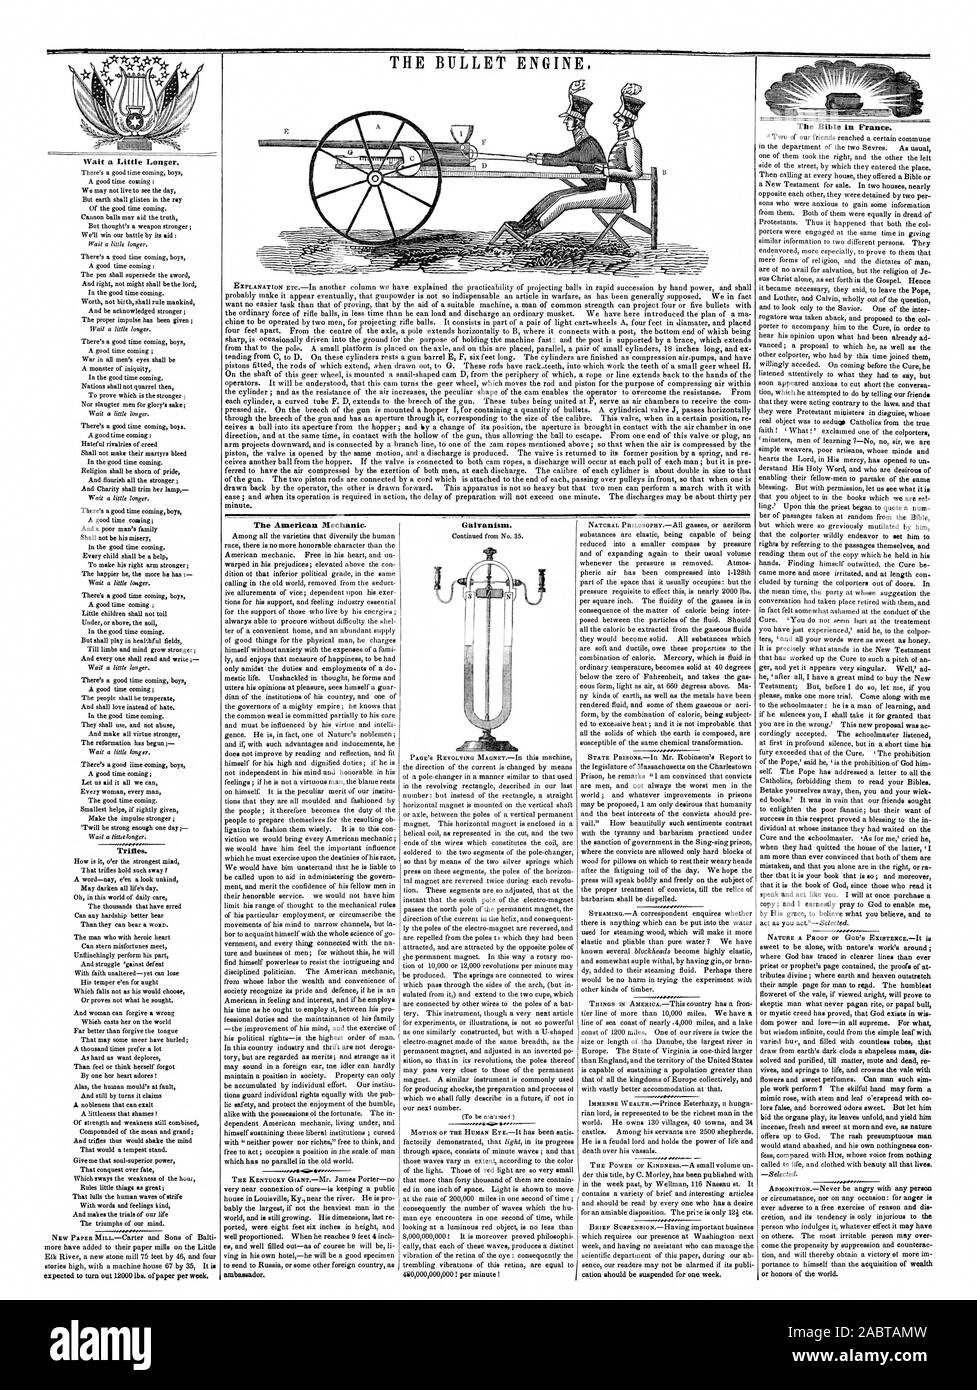 THE BULLET ENGINE The American Mechanic. ambassador. Galvanism. The Bible in France., scientific american, 1846-05-21 Stock Photo